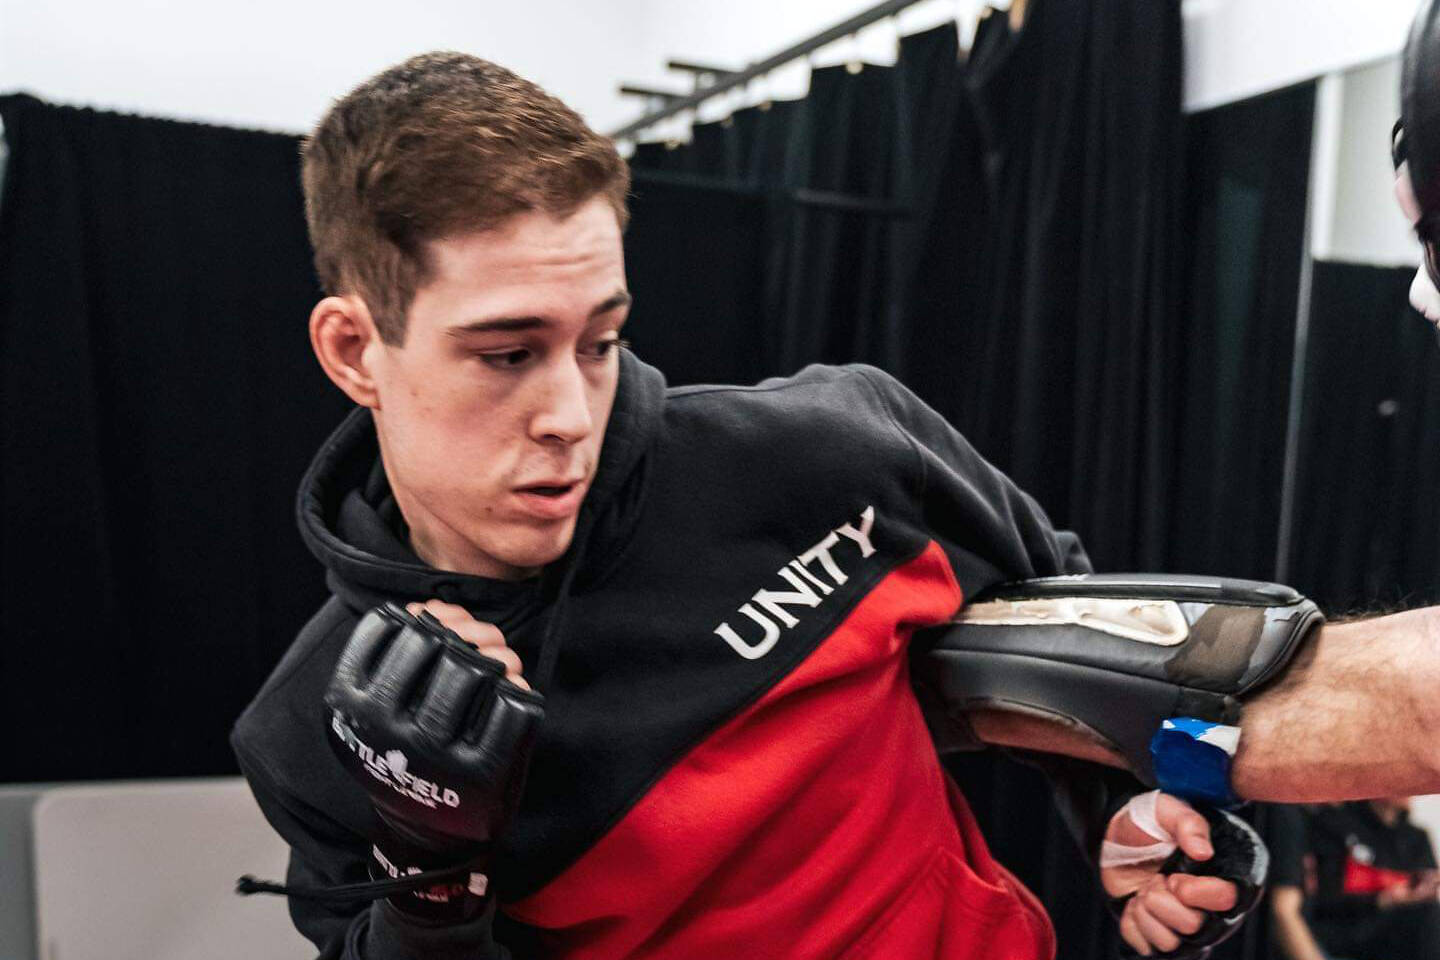 Damon Marlow of Vernon’s Unity MMA and Kickboxing gym won by TKO in a fight against Matt Lepper at Battlefield Fight League 71 in Vancouver on March 10, 2022. (Submitted photo)